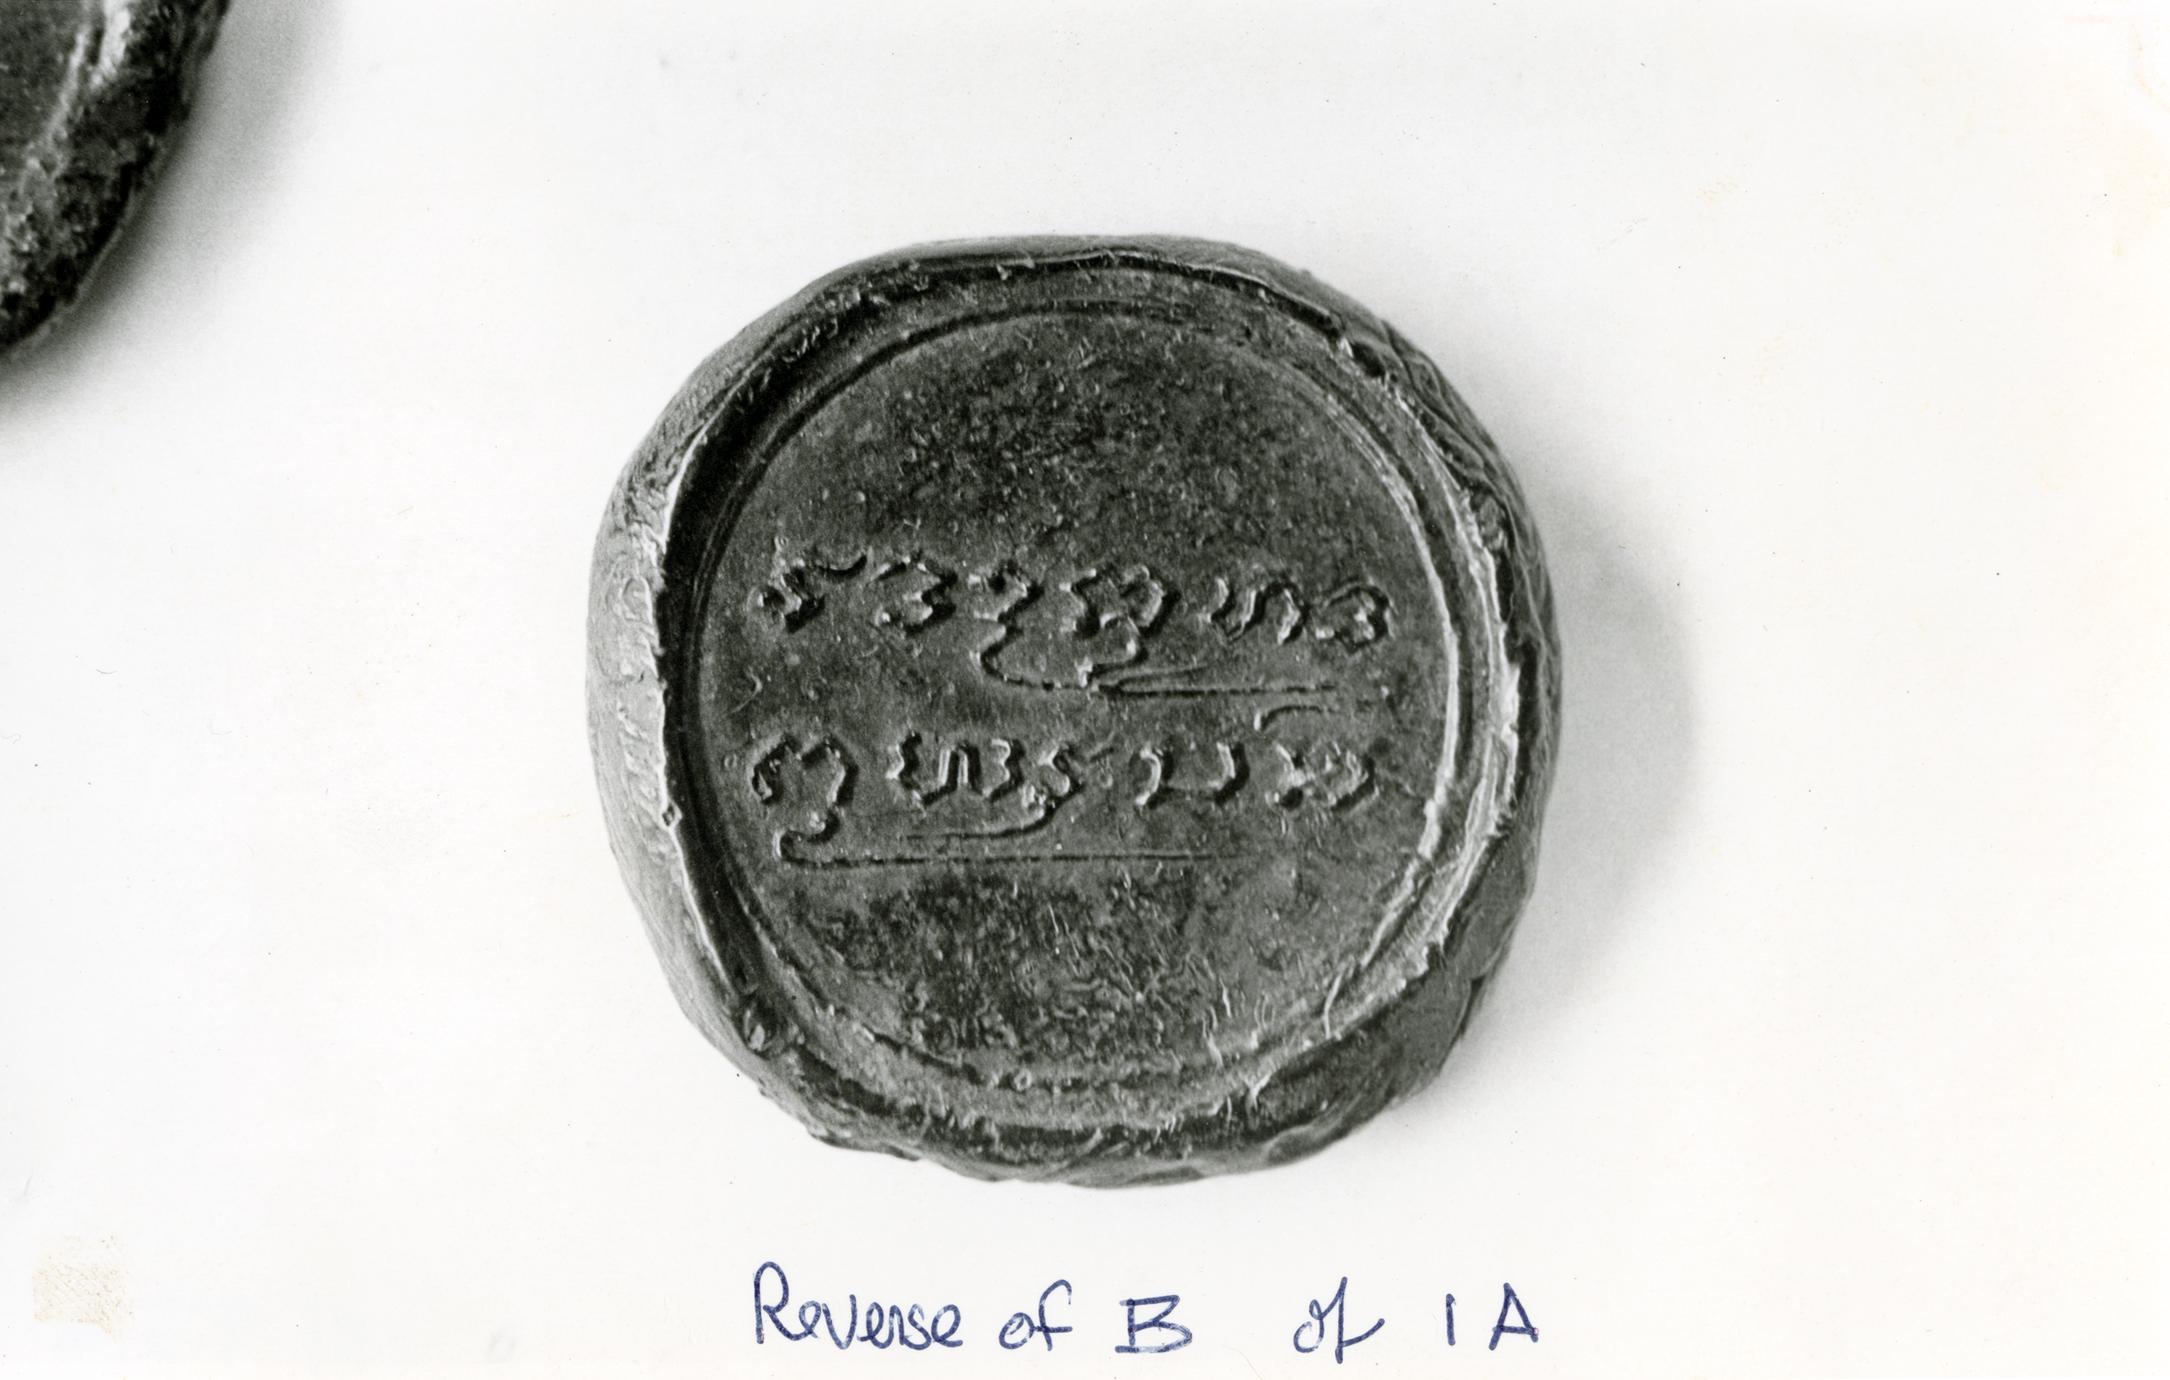 The seals given by King Chao Anou to the Nyaheun people of Kong Senamnoi in Attapu Province